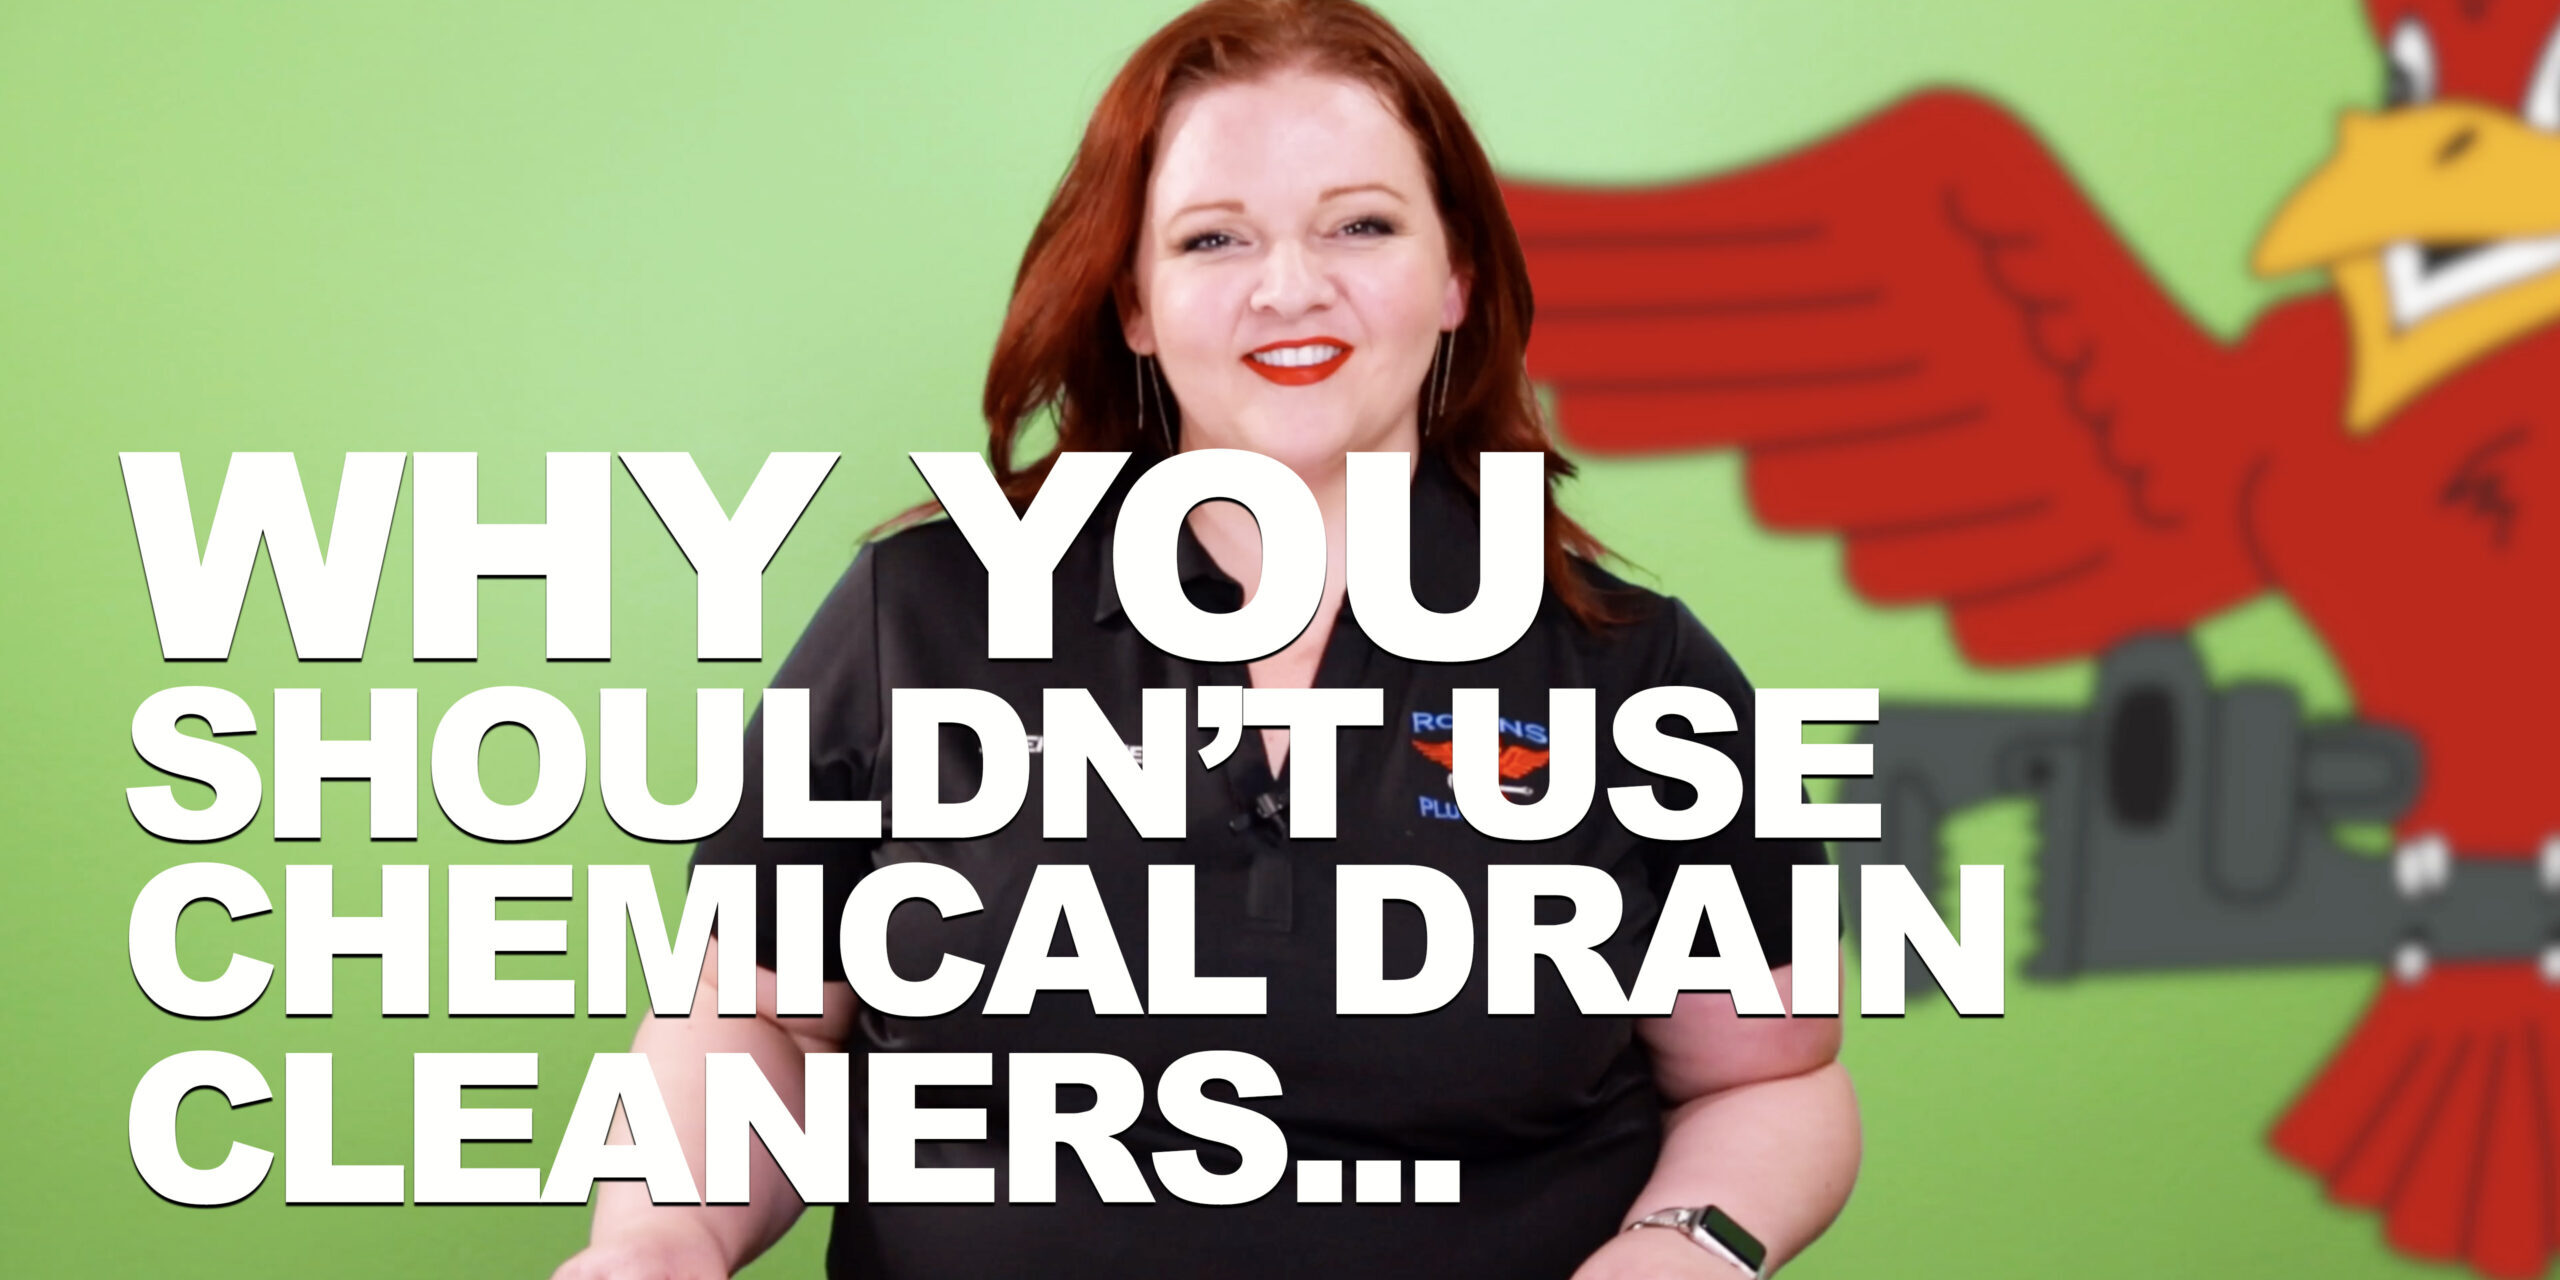 Cover photo for blog and video "Why You Shouldn't Use Chemical Drain Cleaners"